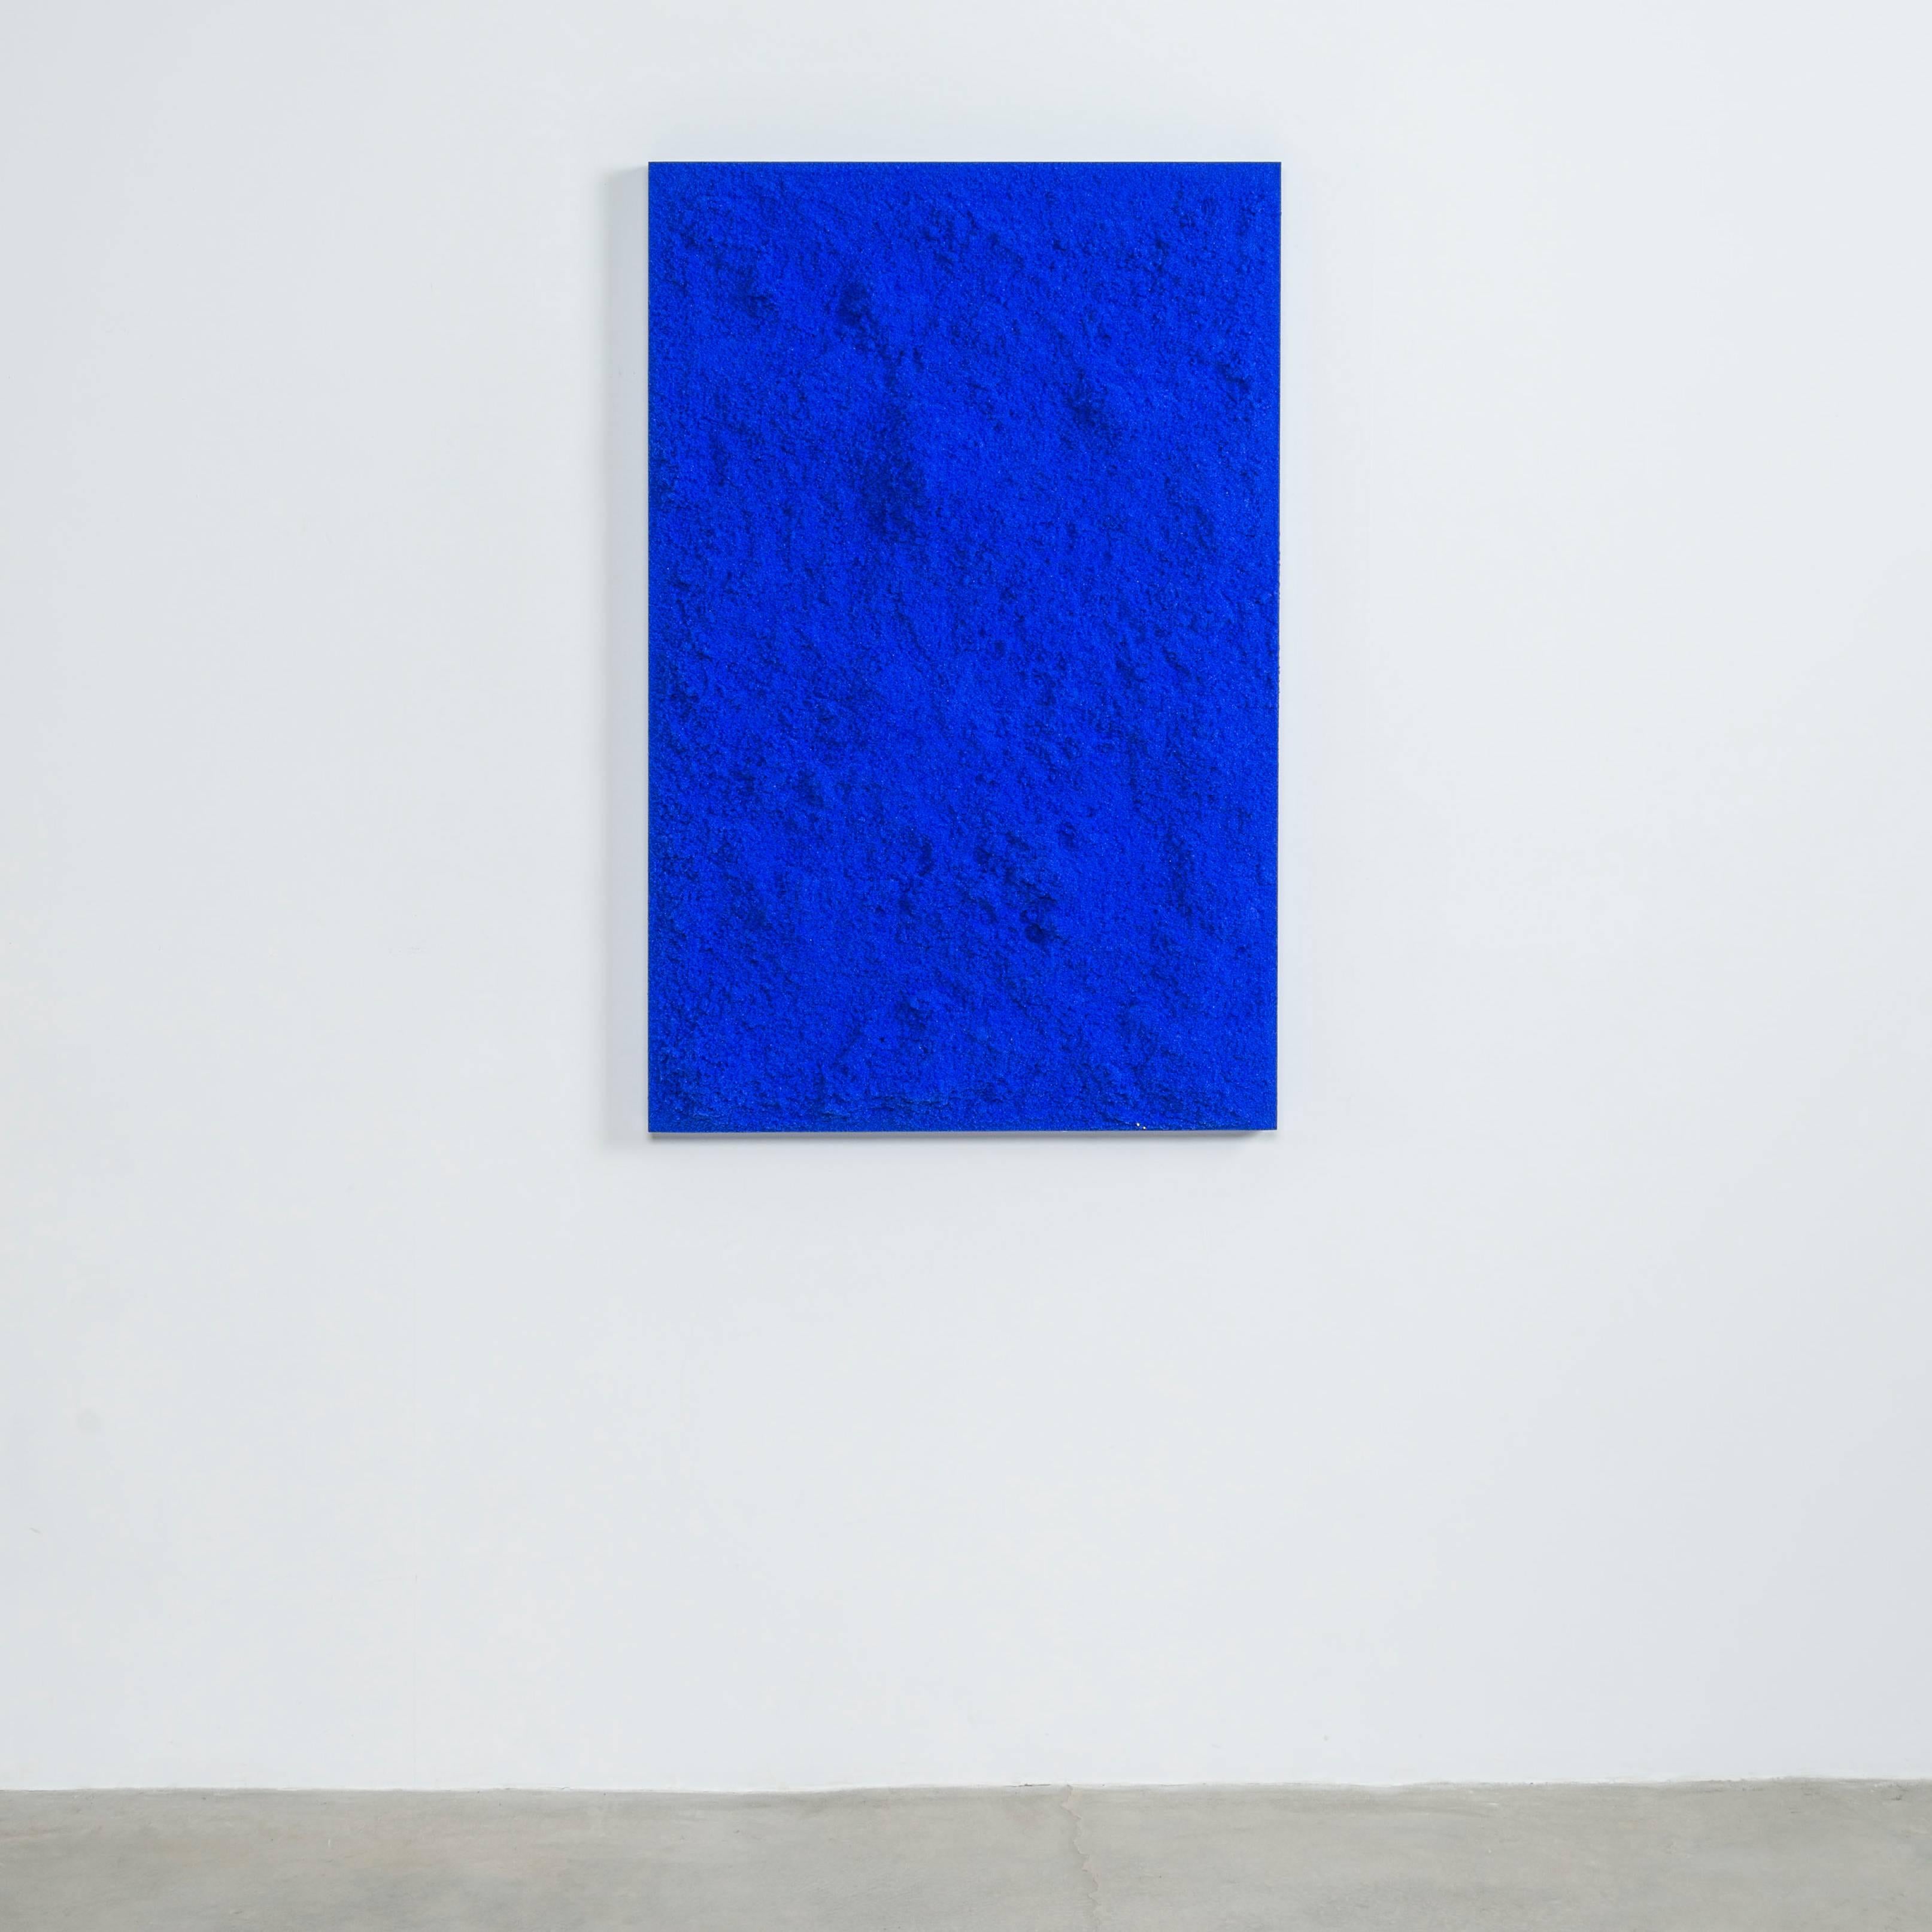 Through a layering of hand-dyed powdered glass, the painting is organically textured and strikingly unadorned. The mass of bright blue granules come together in a terrain-like abstraction.